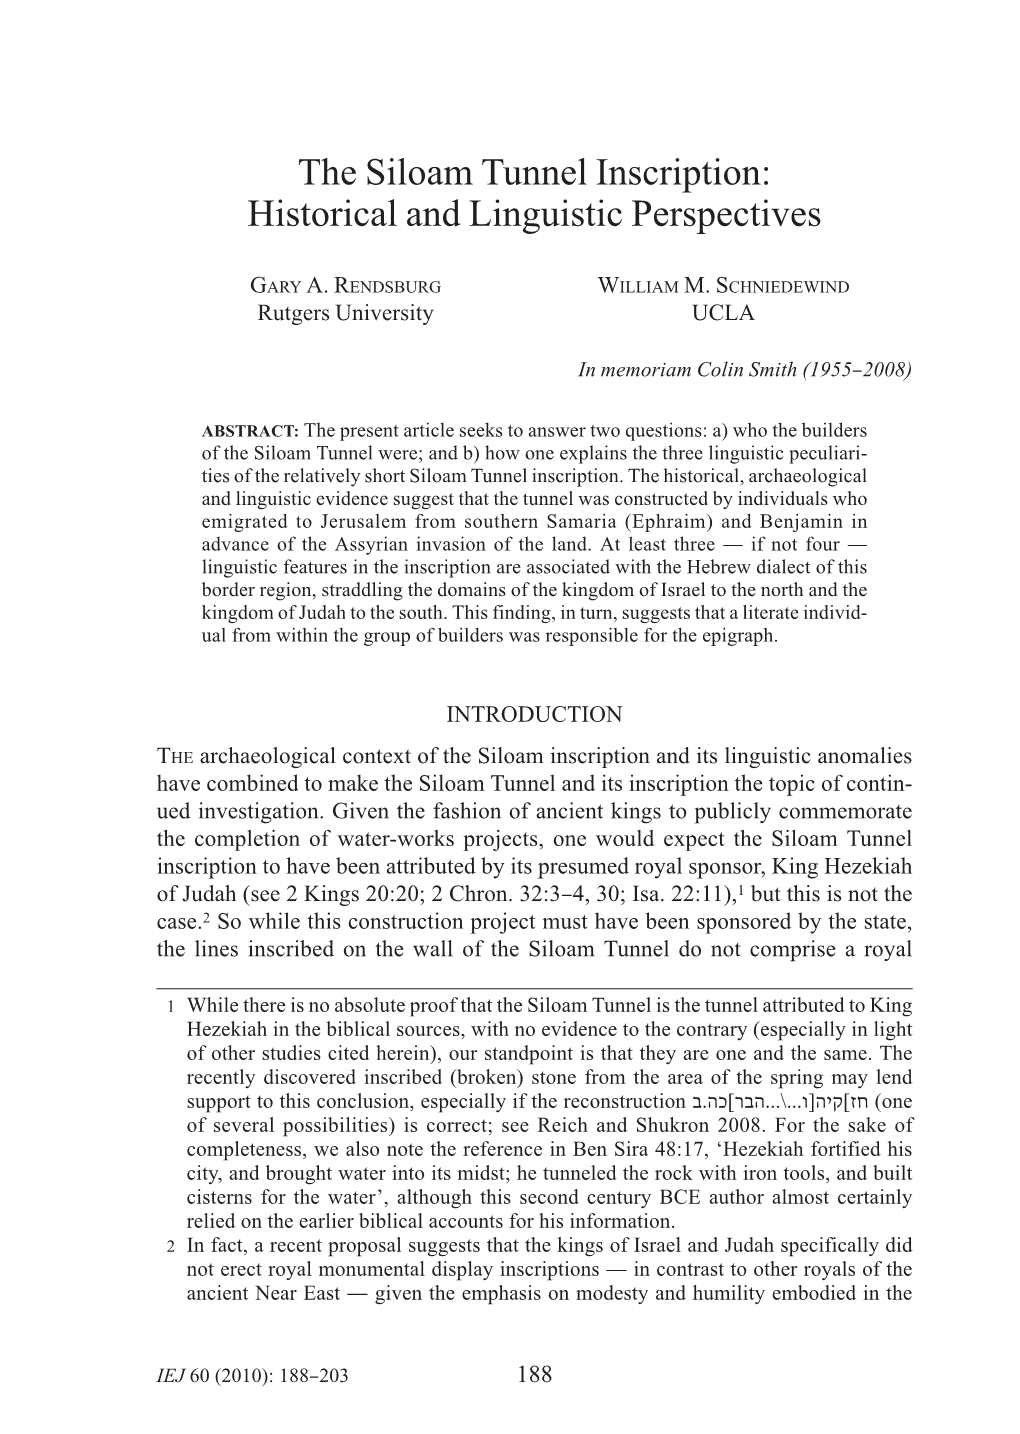 The Siloam Tunnel Inscription: Historical and Linguistic Perspectives